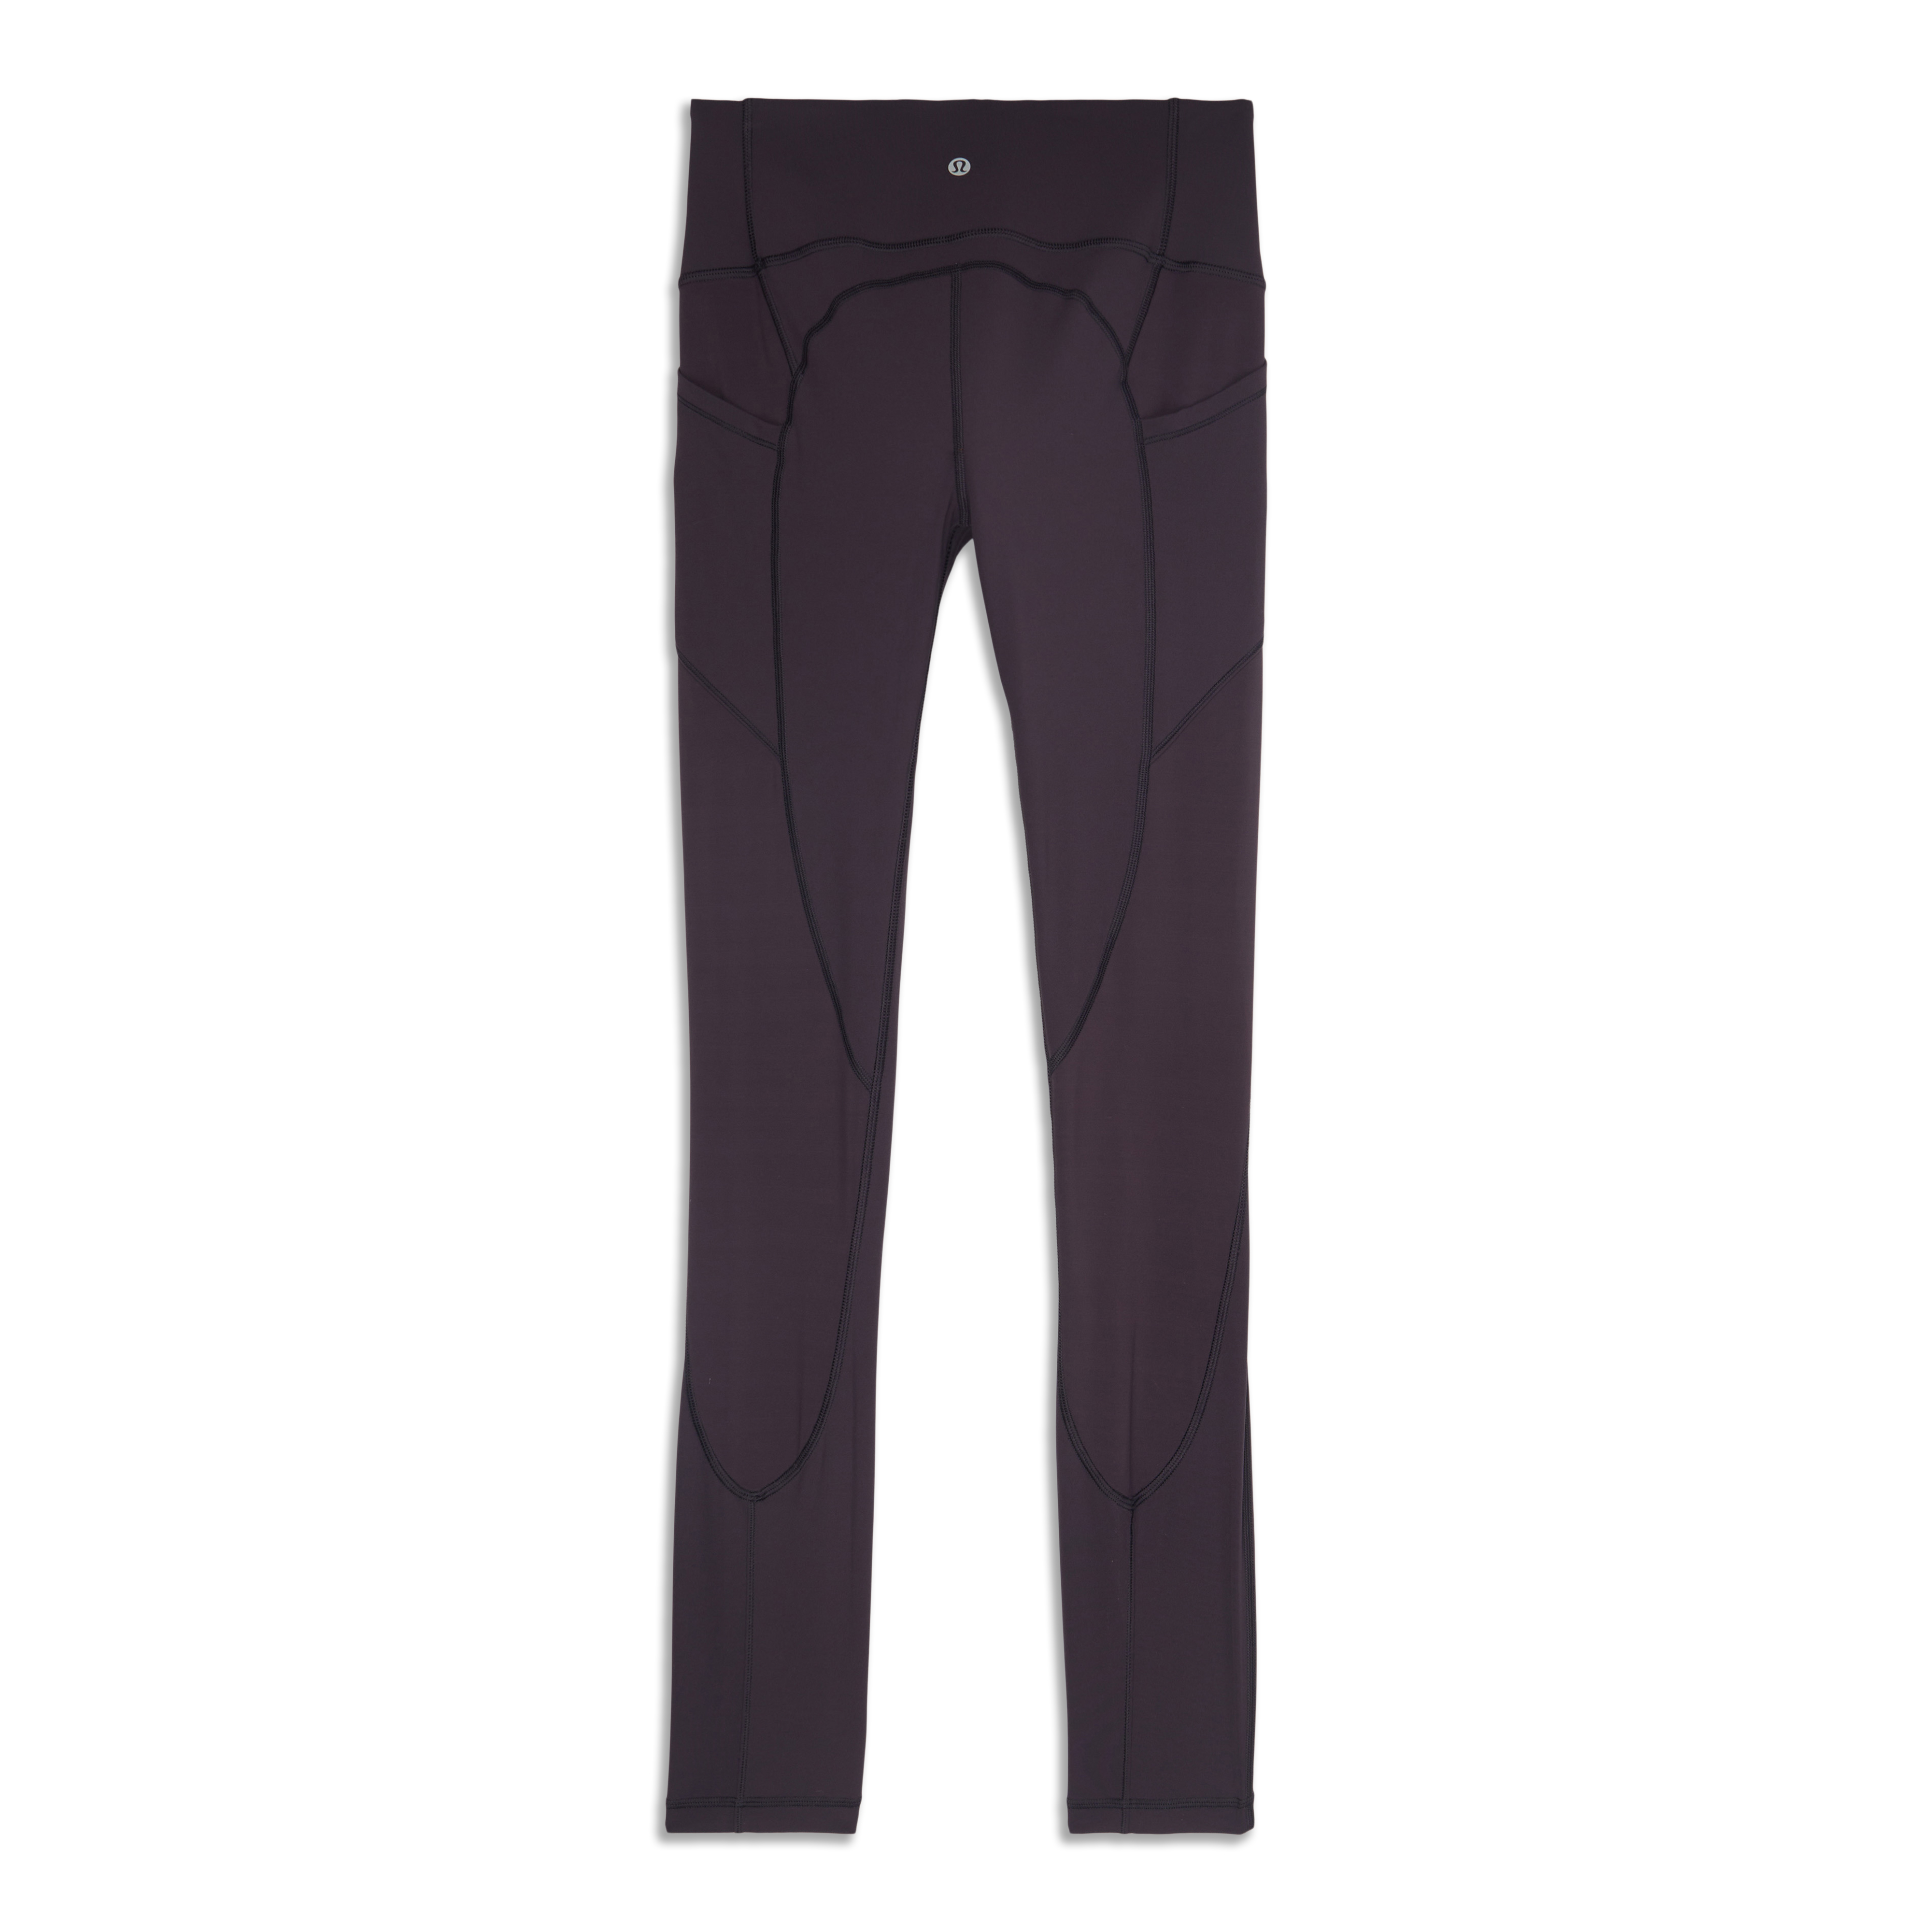 Stay stylish and comfortable with Lululemon All The Right Places Pant II